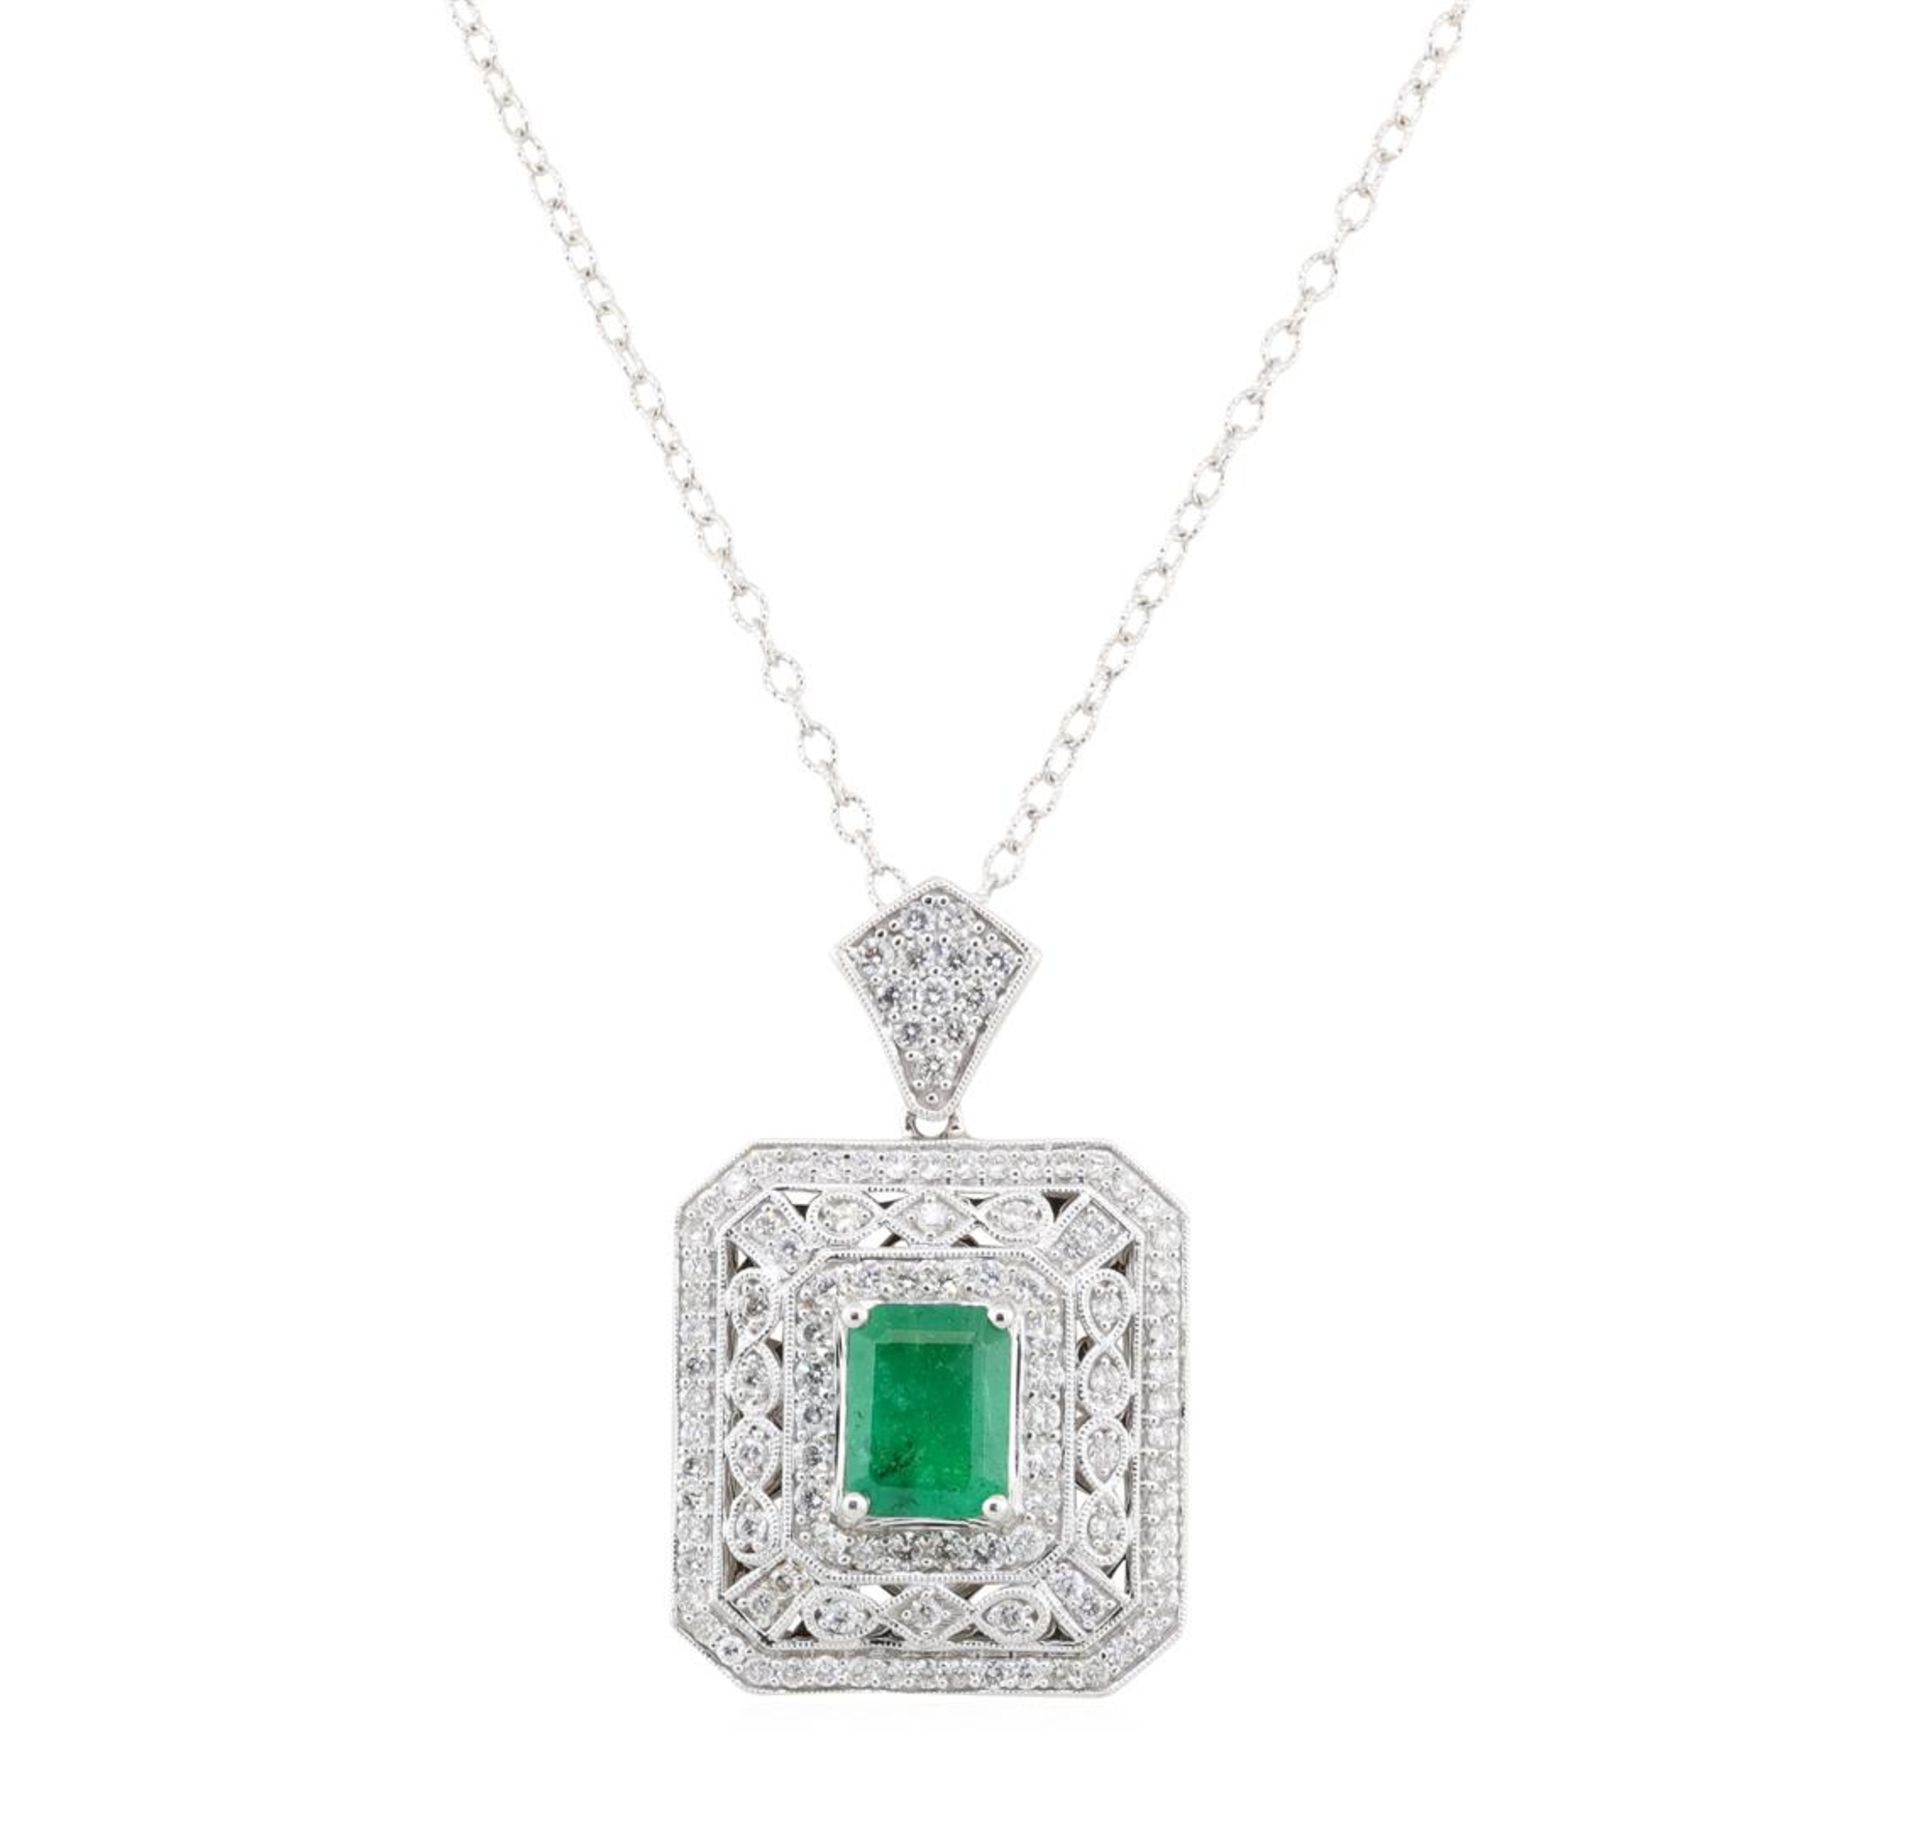 2.85ctw Emerald and Diamond Pendant With Chain - 18KT White Gold - Image 2 of 2